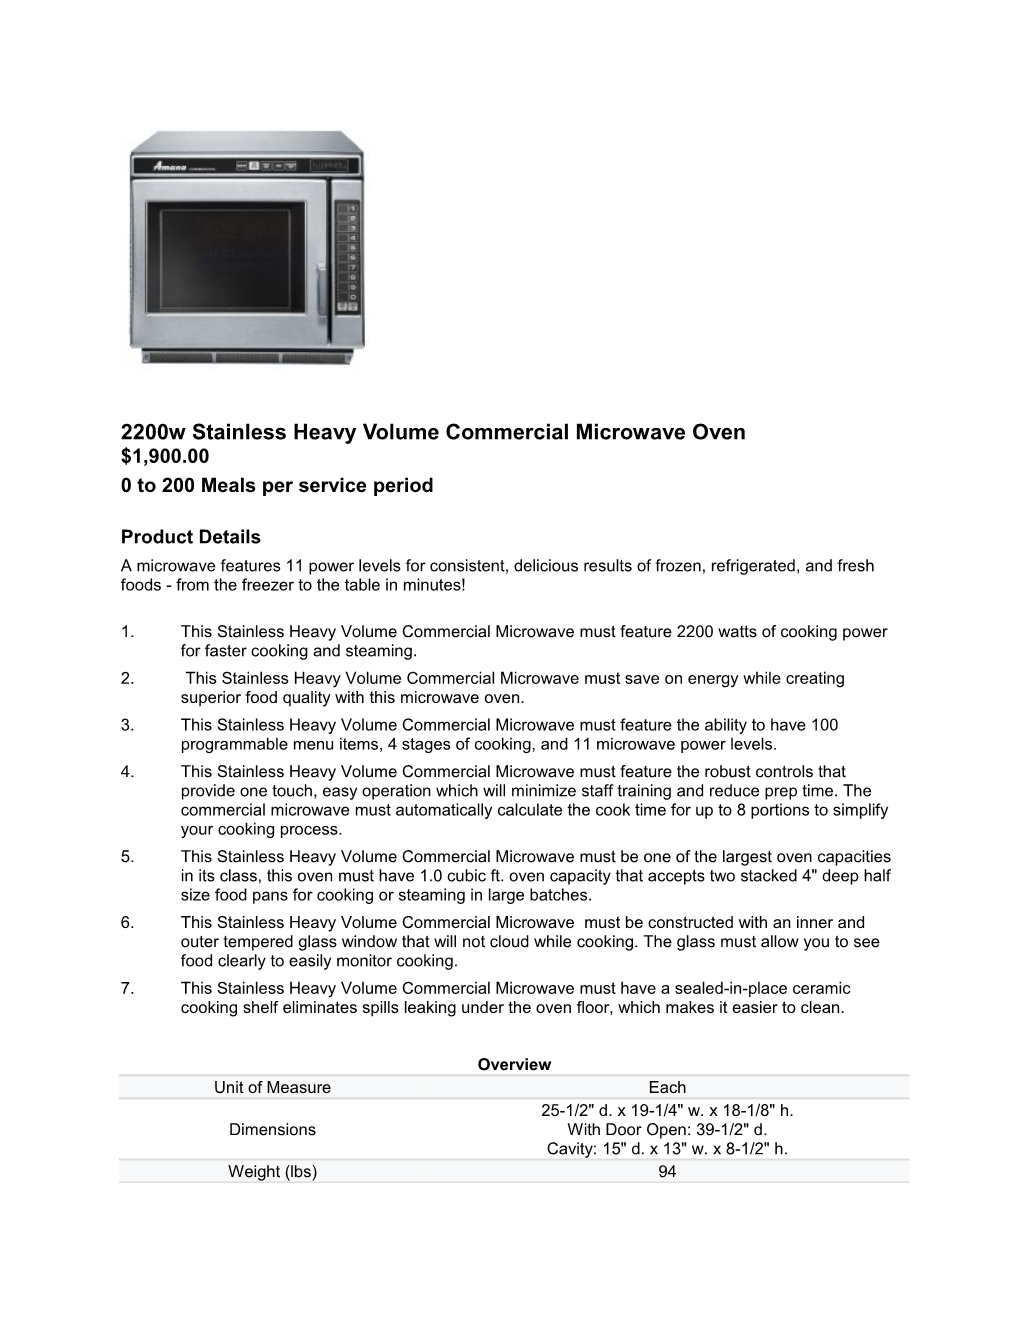 2200W Stainless Heavy Volume Commercial Microwave Oven